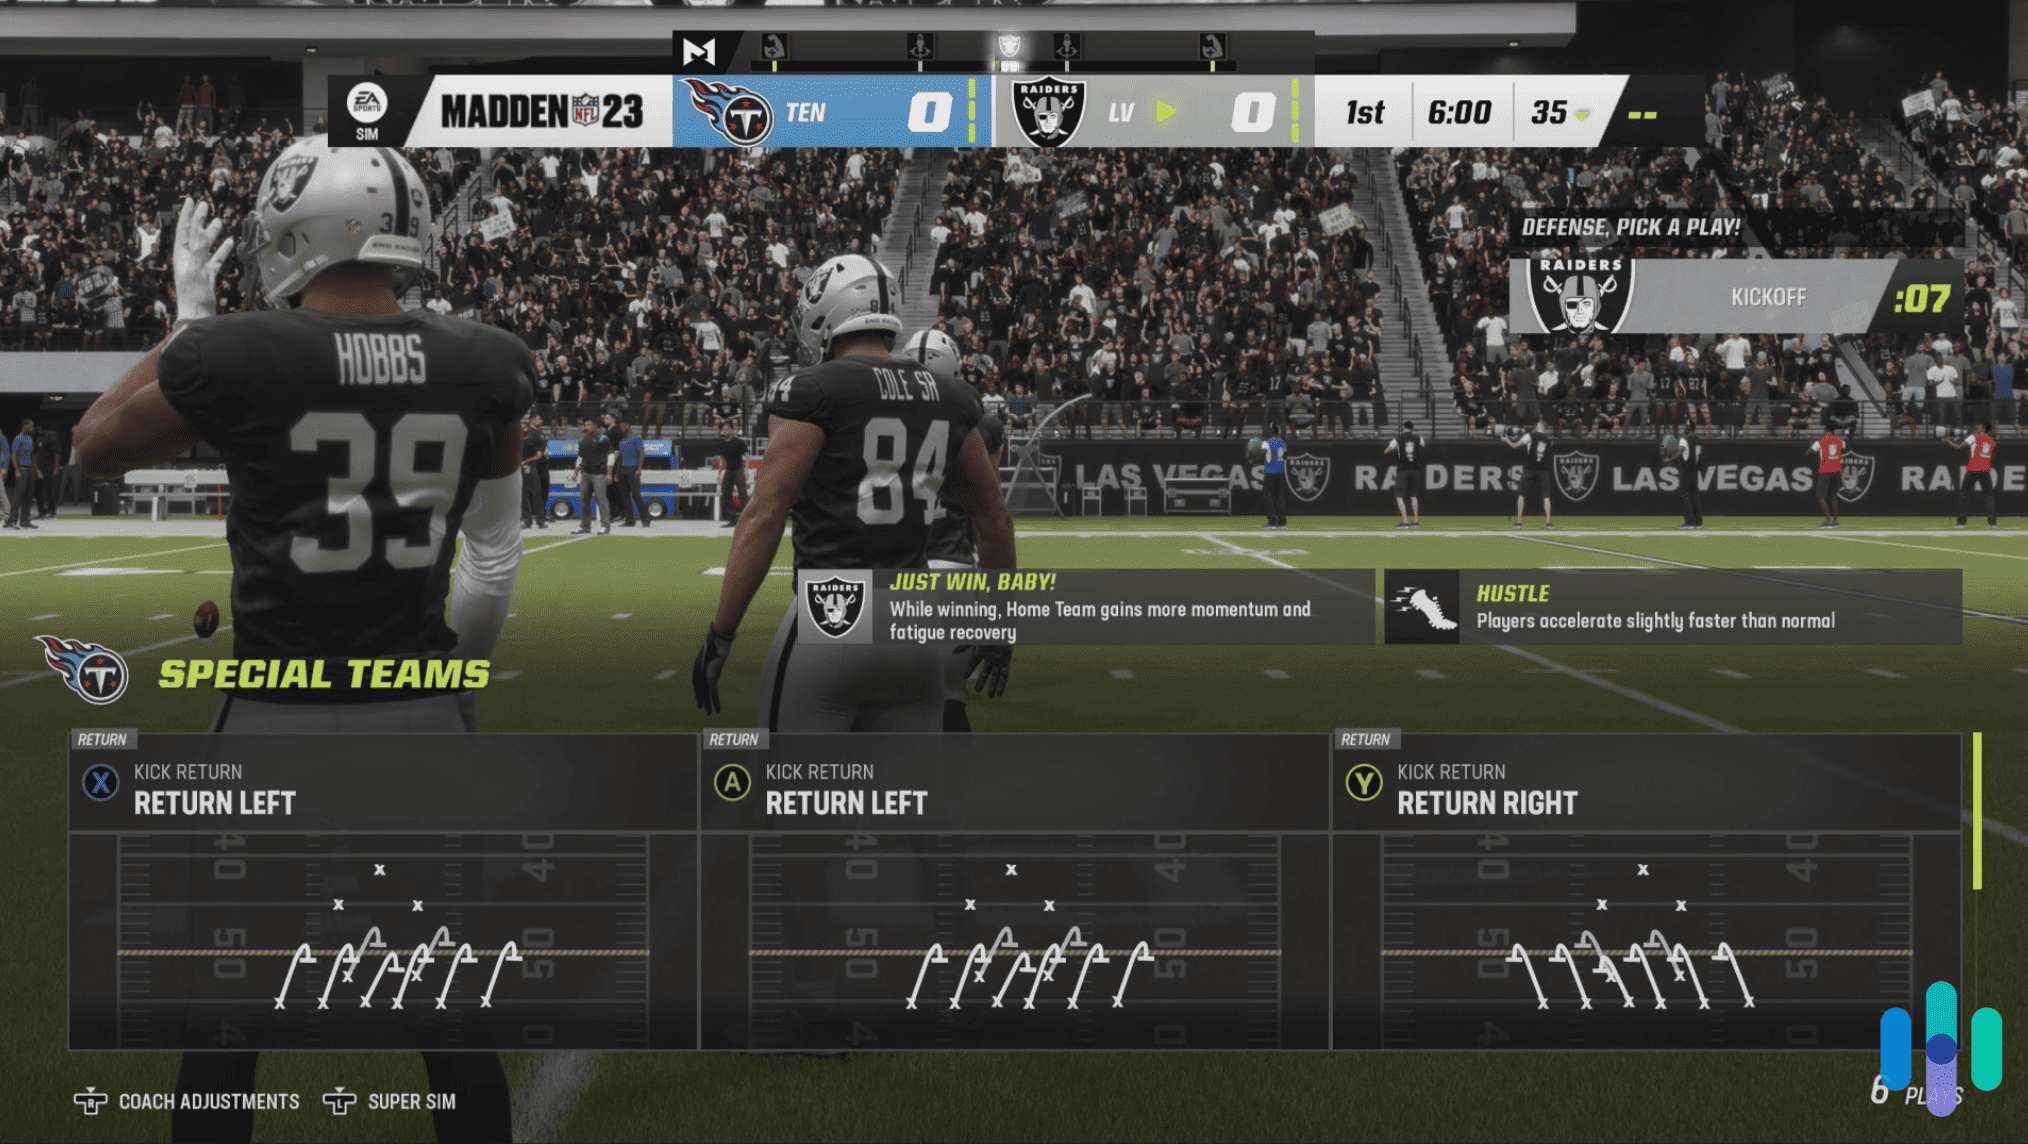 Connected to a VPN while playing Madden 23 on Xbox Series X